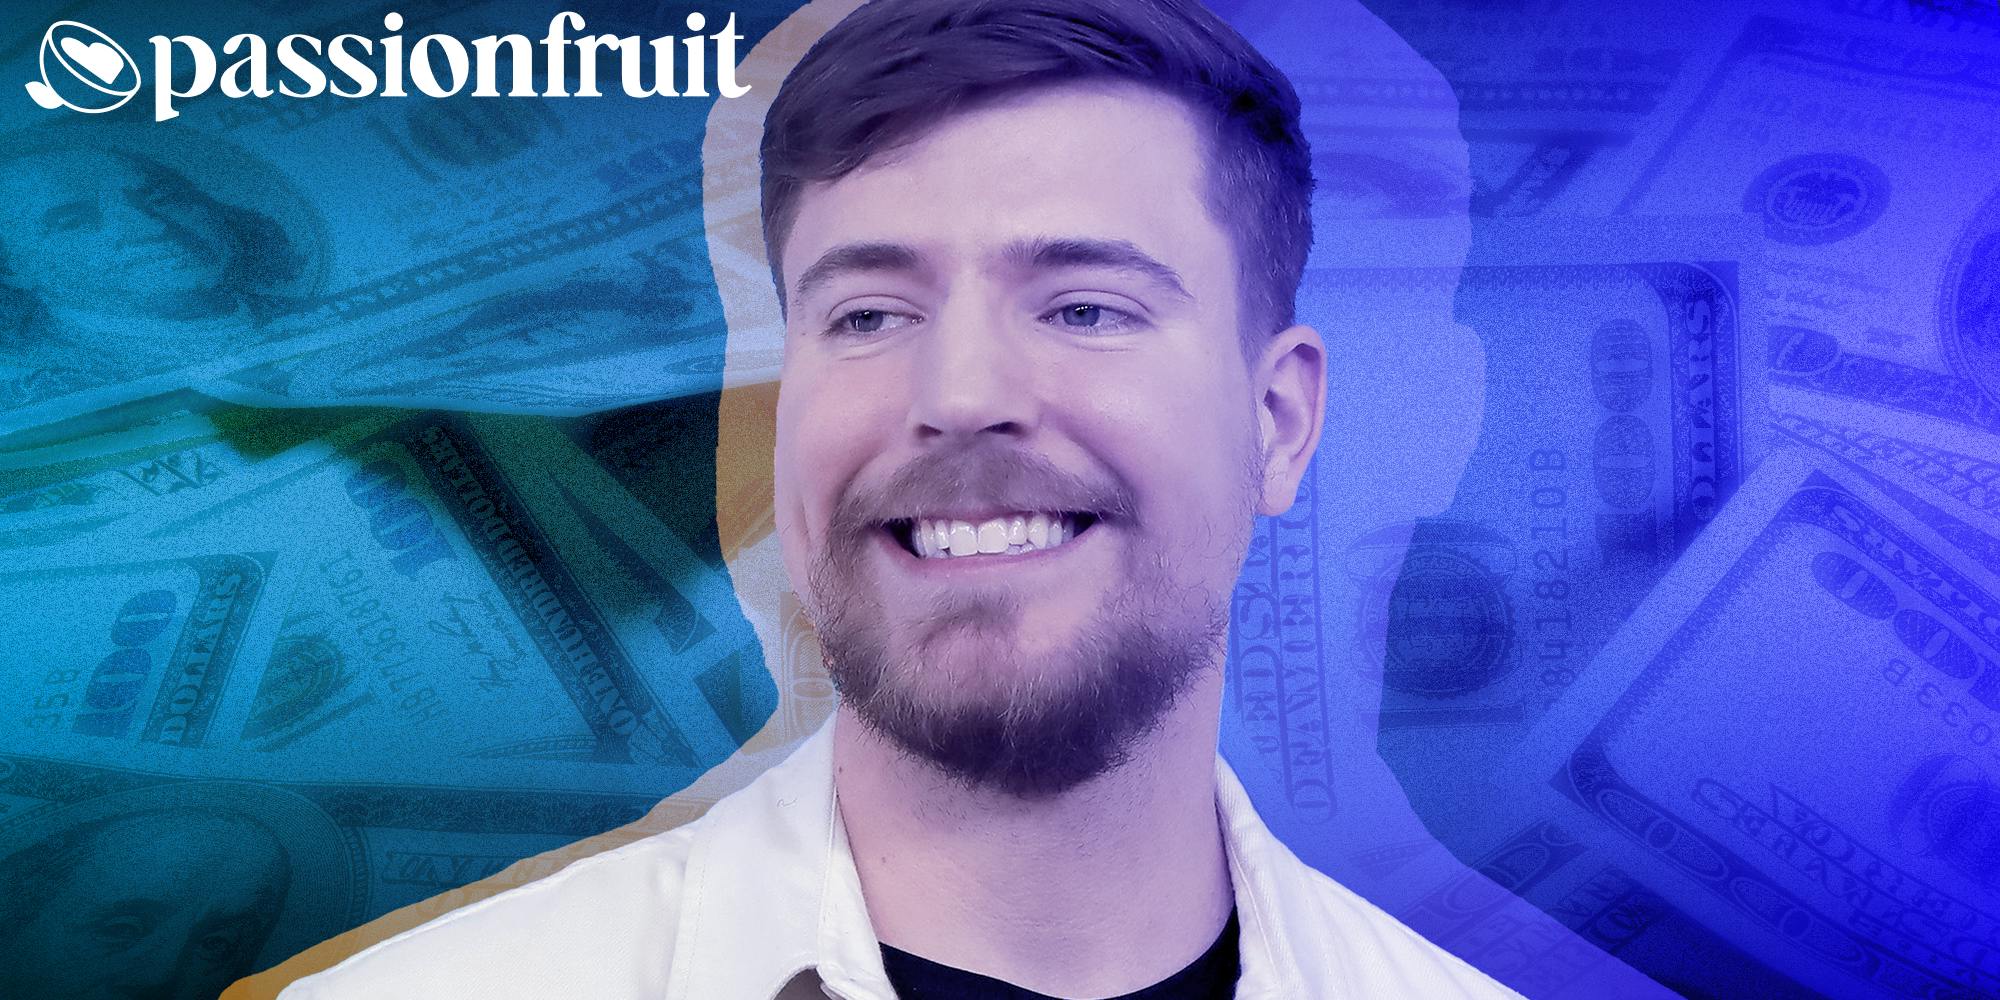 mrbeast on background of dollar bills next to a passionfruit logo